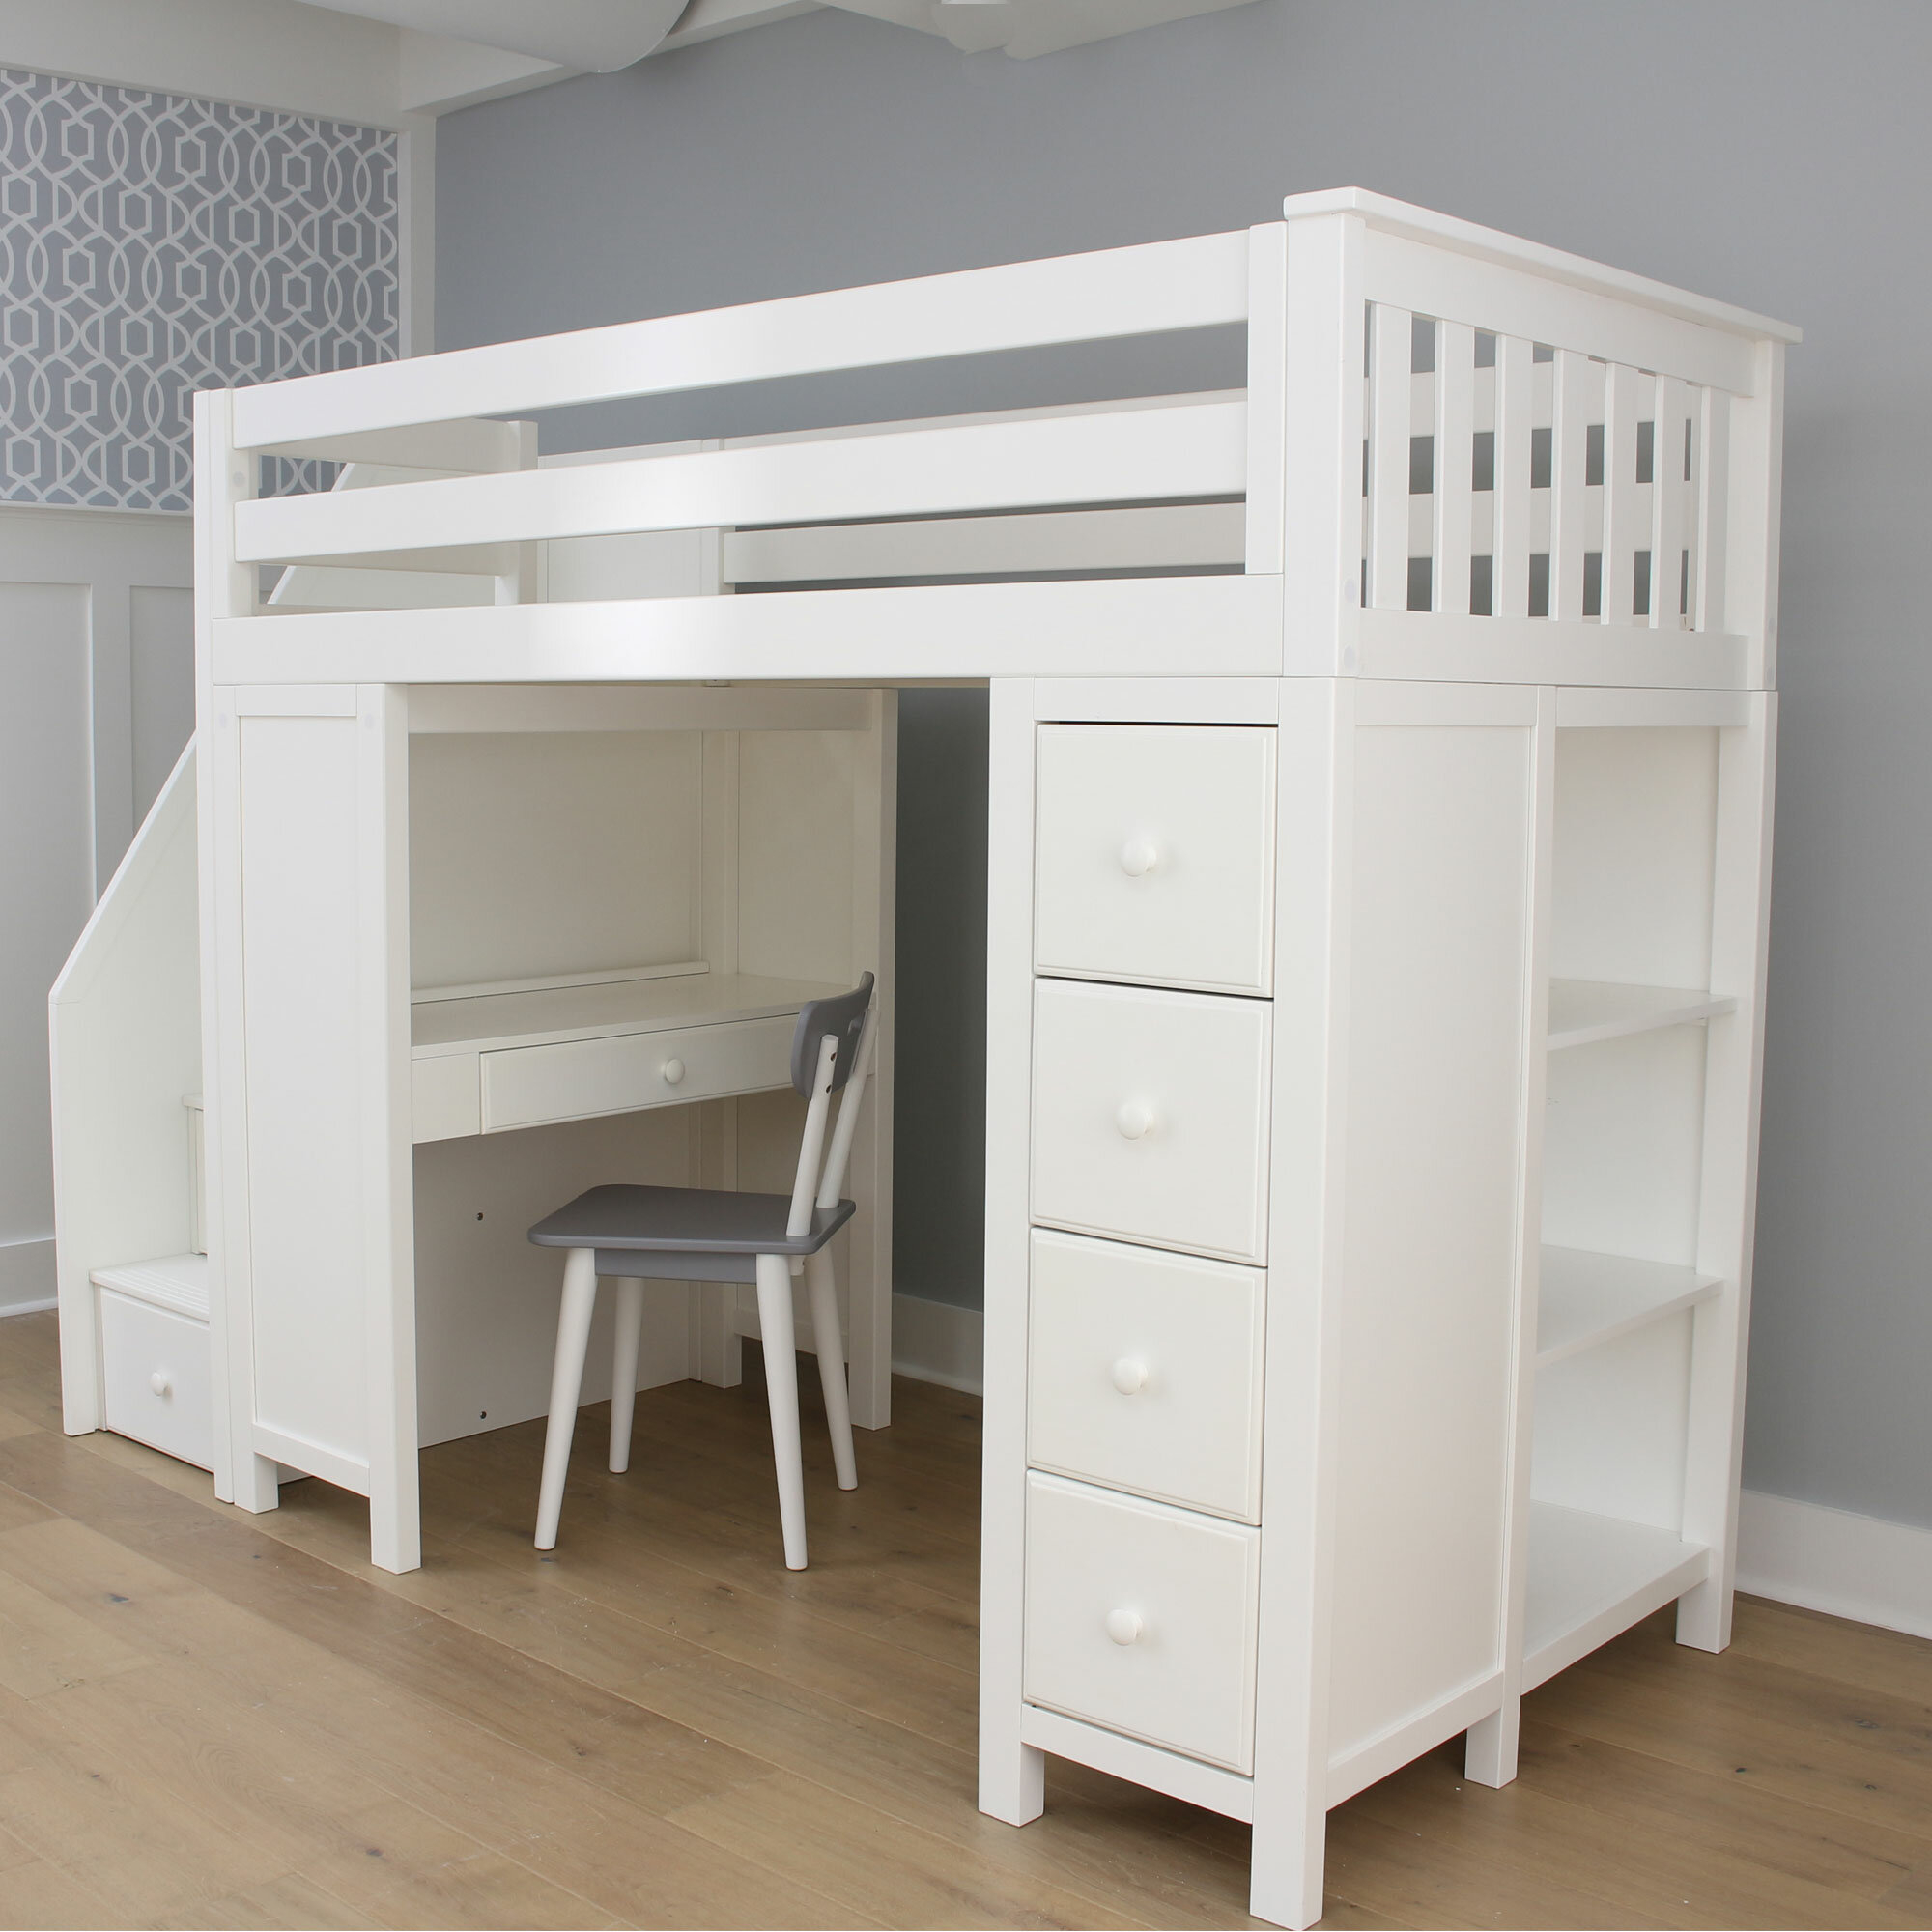 Bunk Beds With Dressers Visualhunt, Bunk Bed And Desk Combination